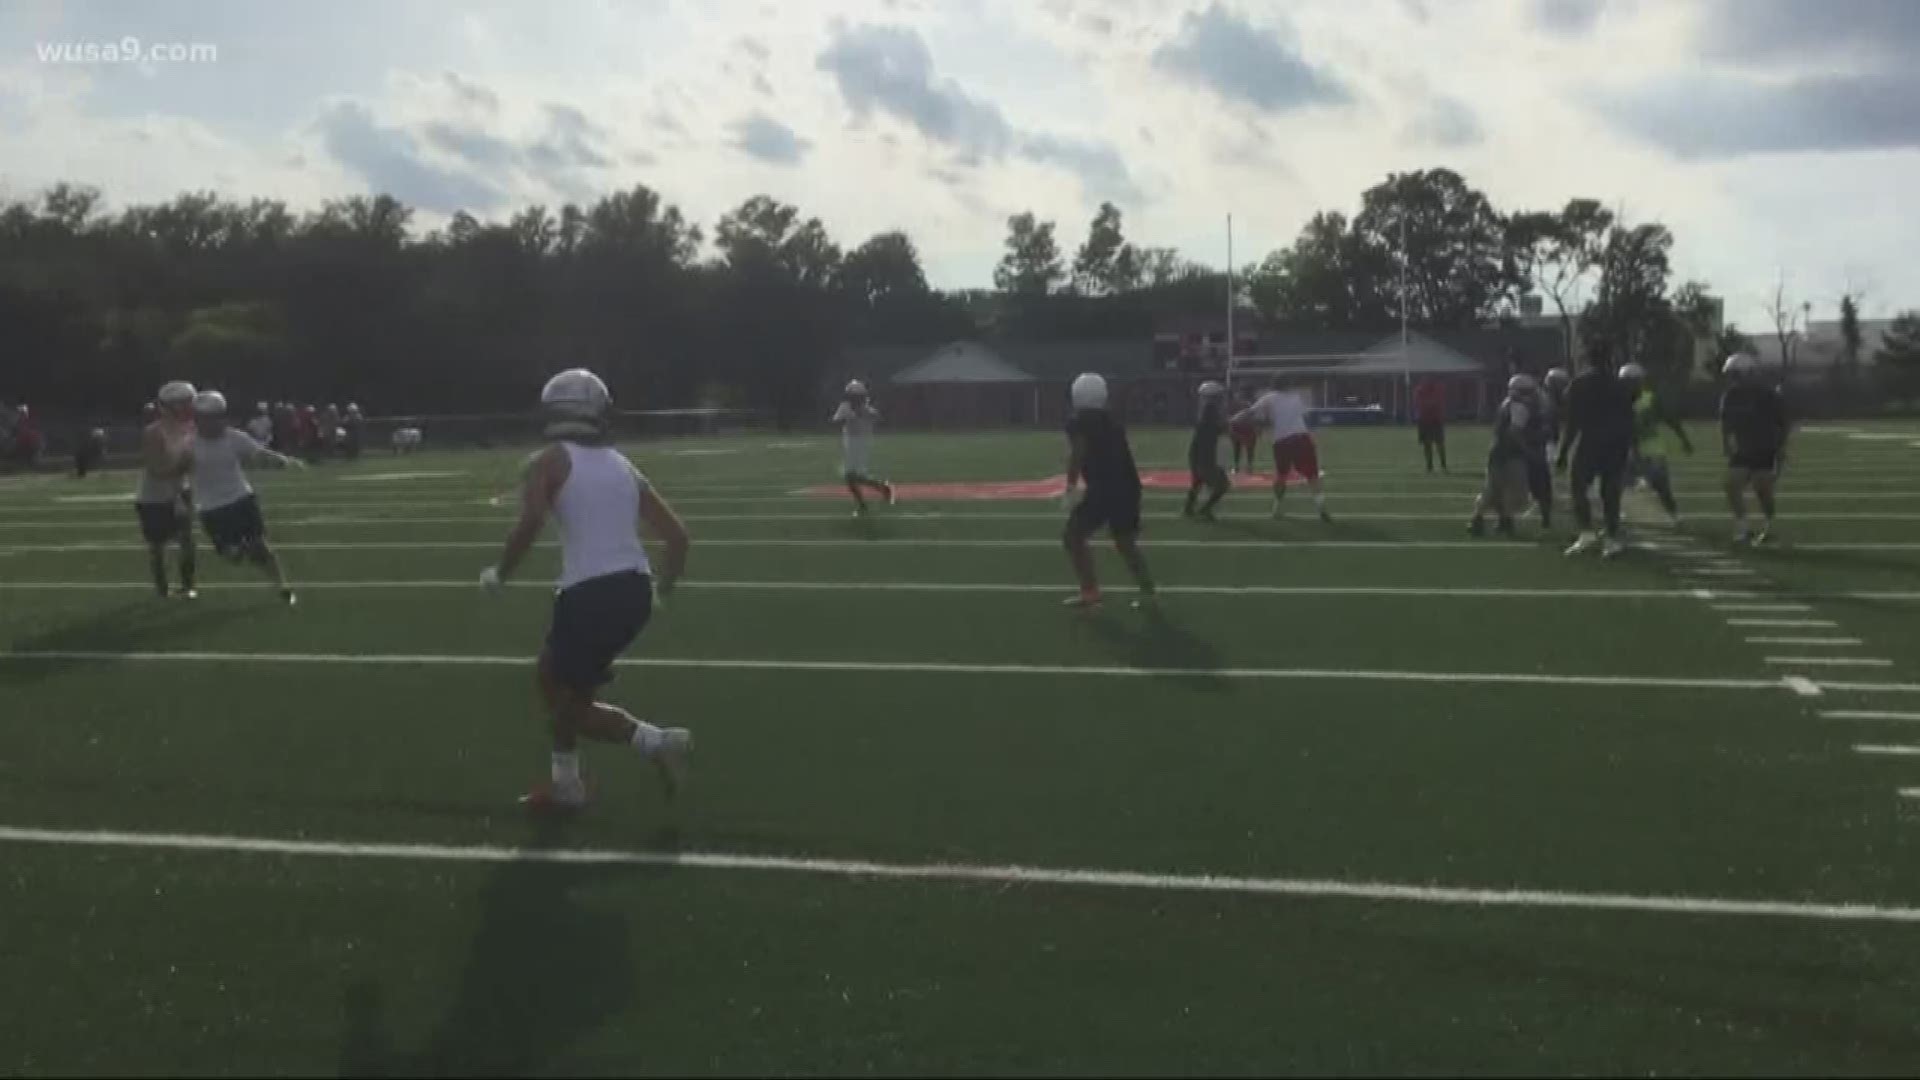 Less than 20 kids showed up for opening practice in 2018, forcing school officials to suspend the program because of safety concerns.